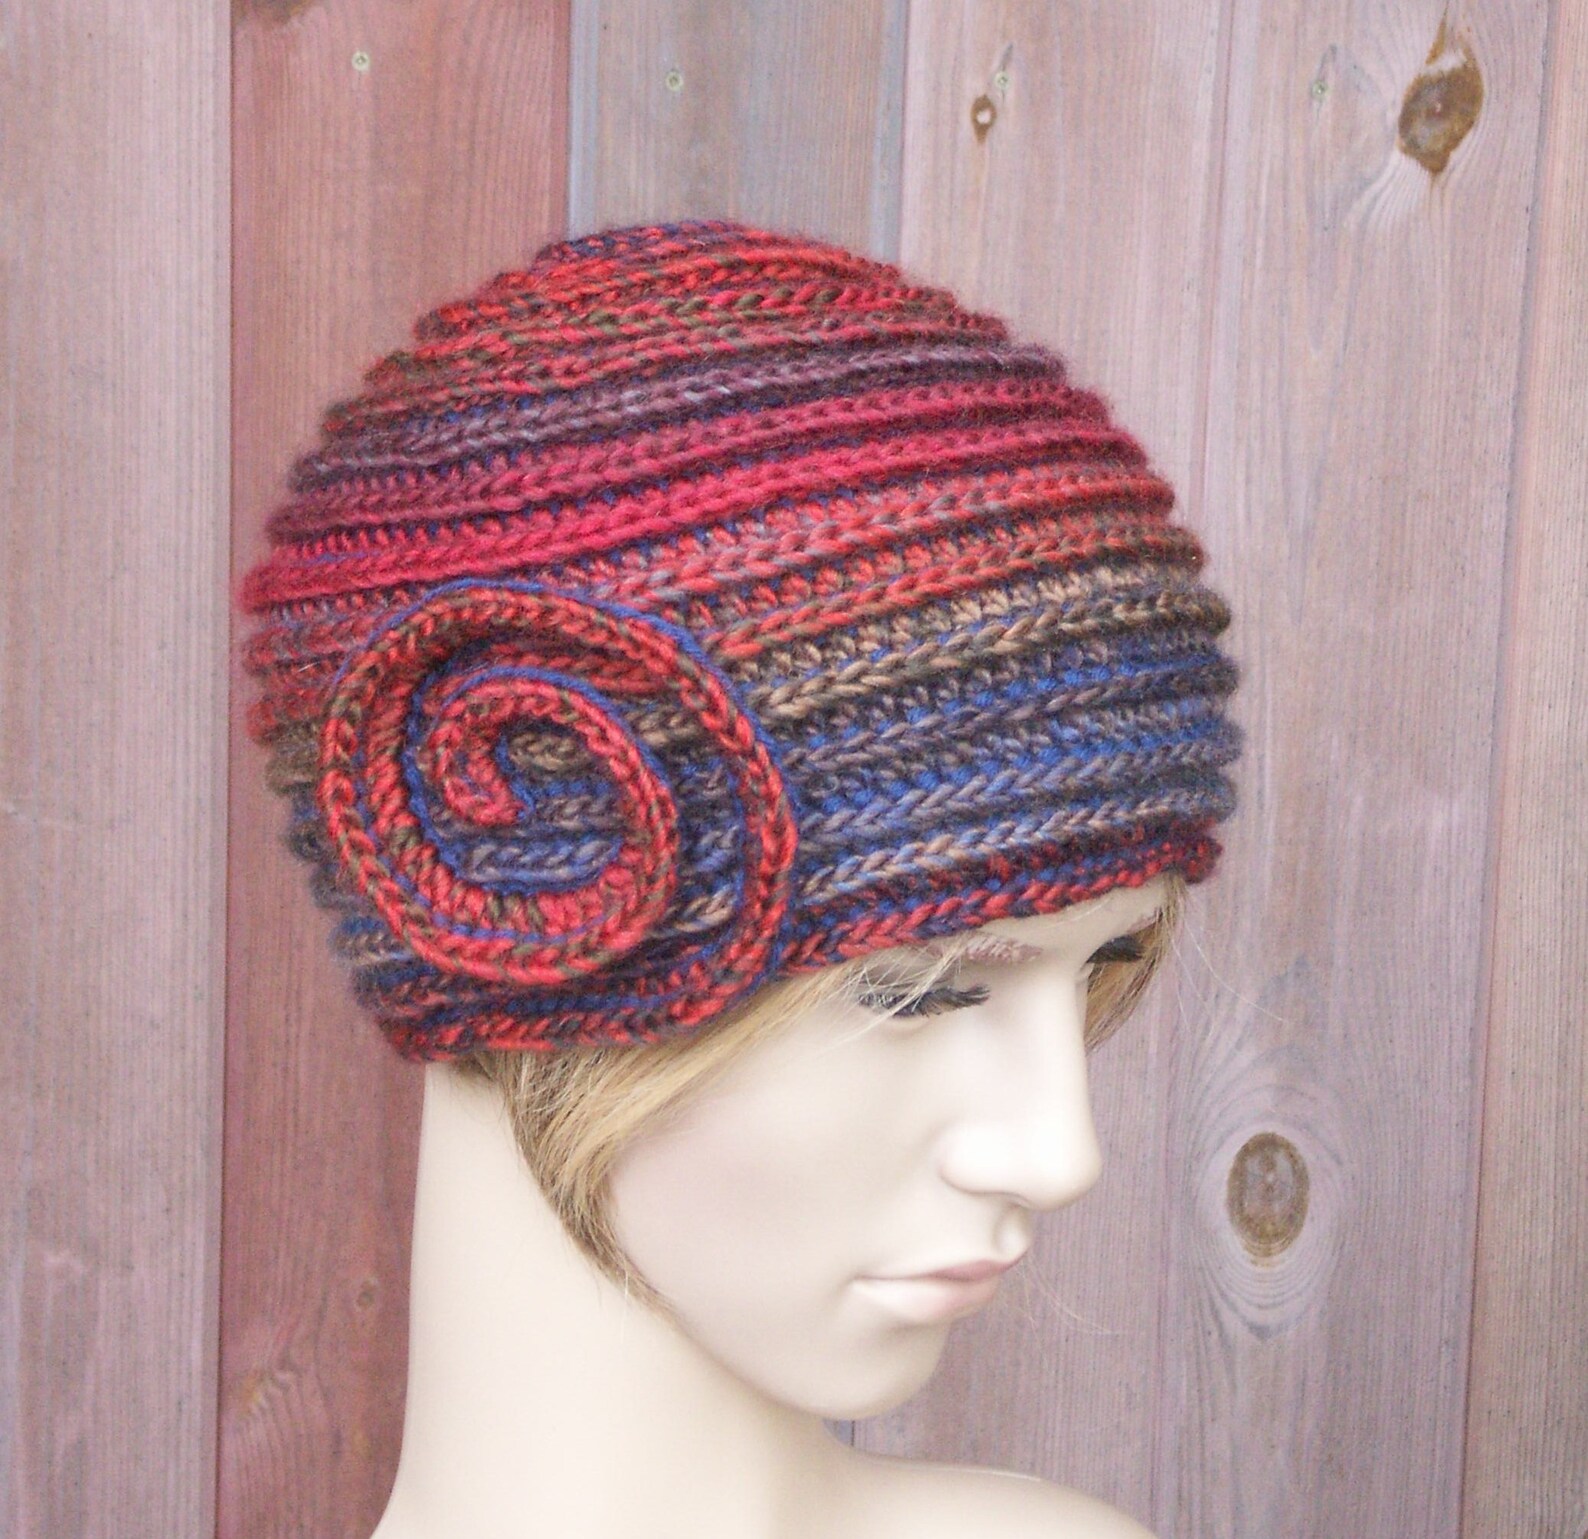 Women's Winter Hat Crochet Red With Blue and Multicolor - Etsy